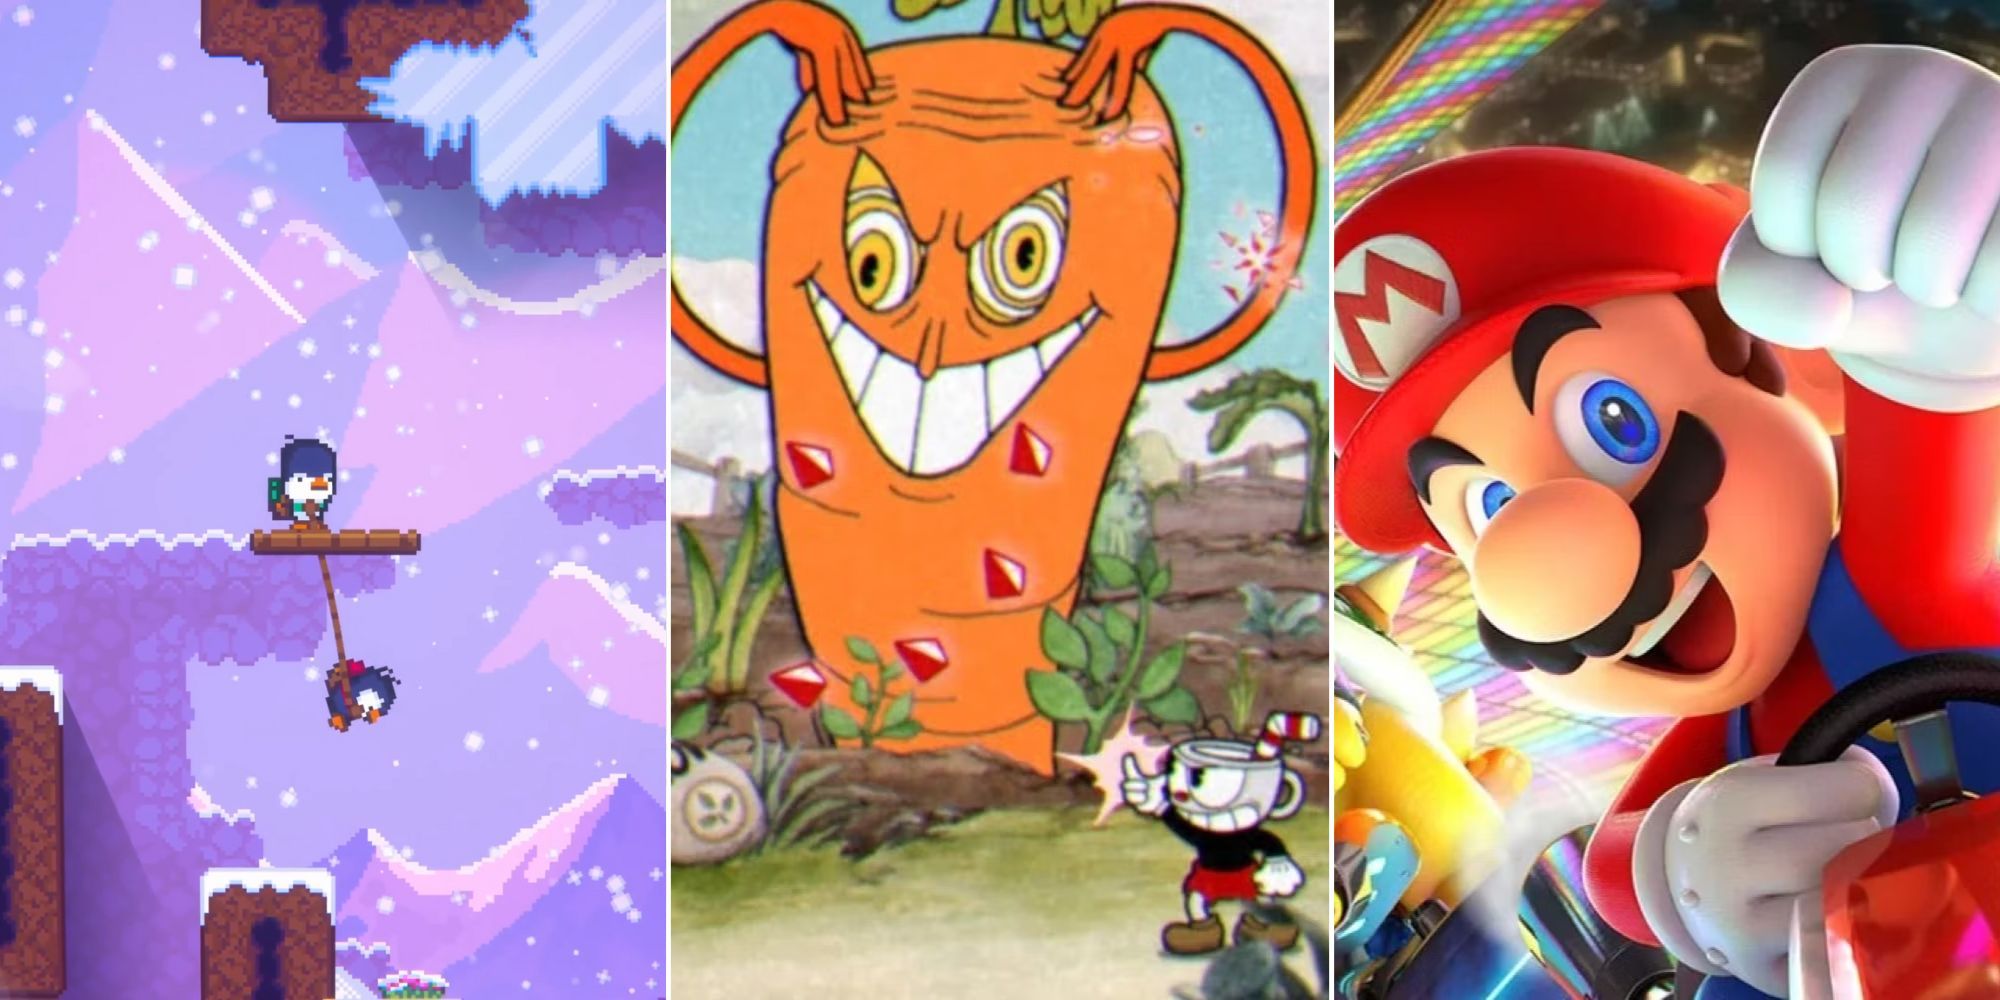 Split image of Bread and Fred, Cuphead, and Mario Kart